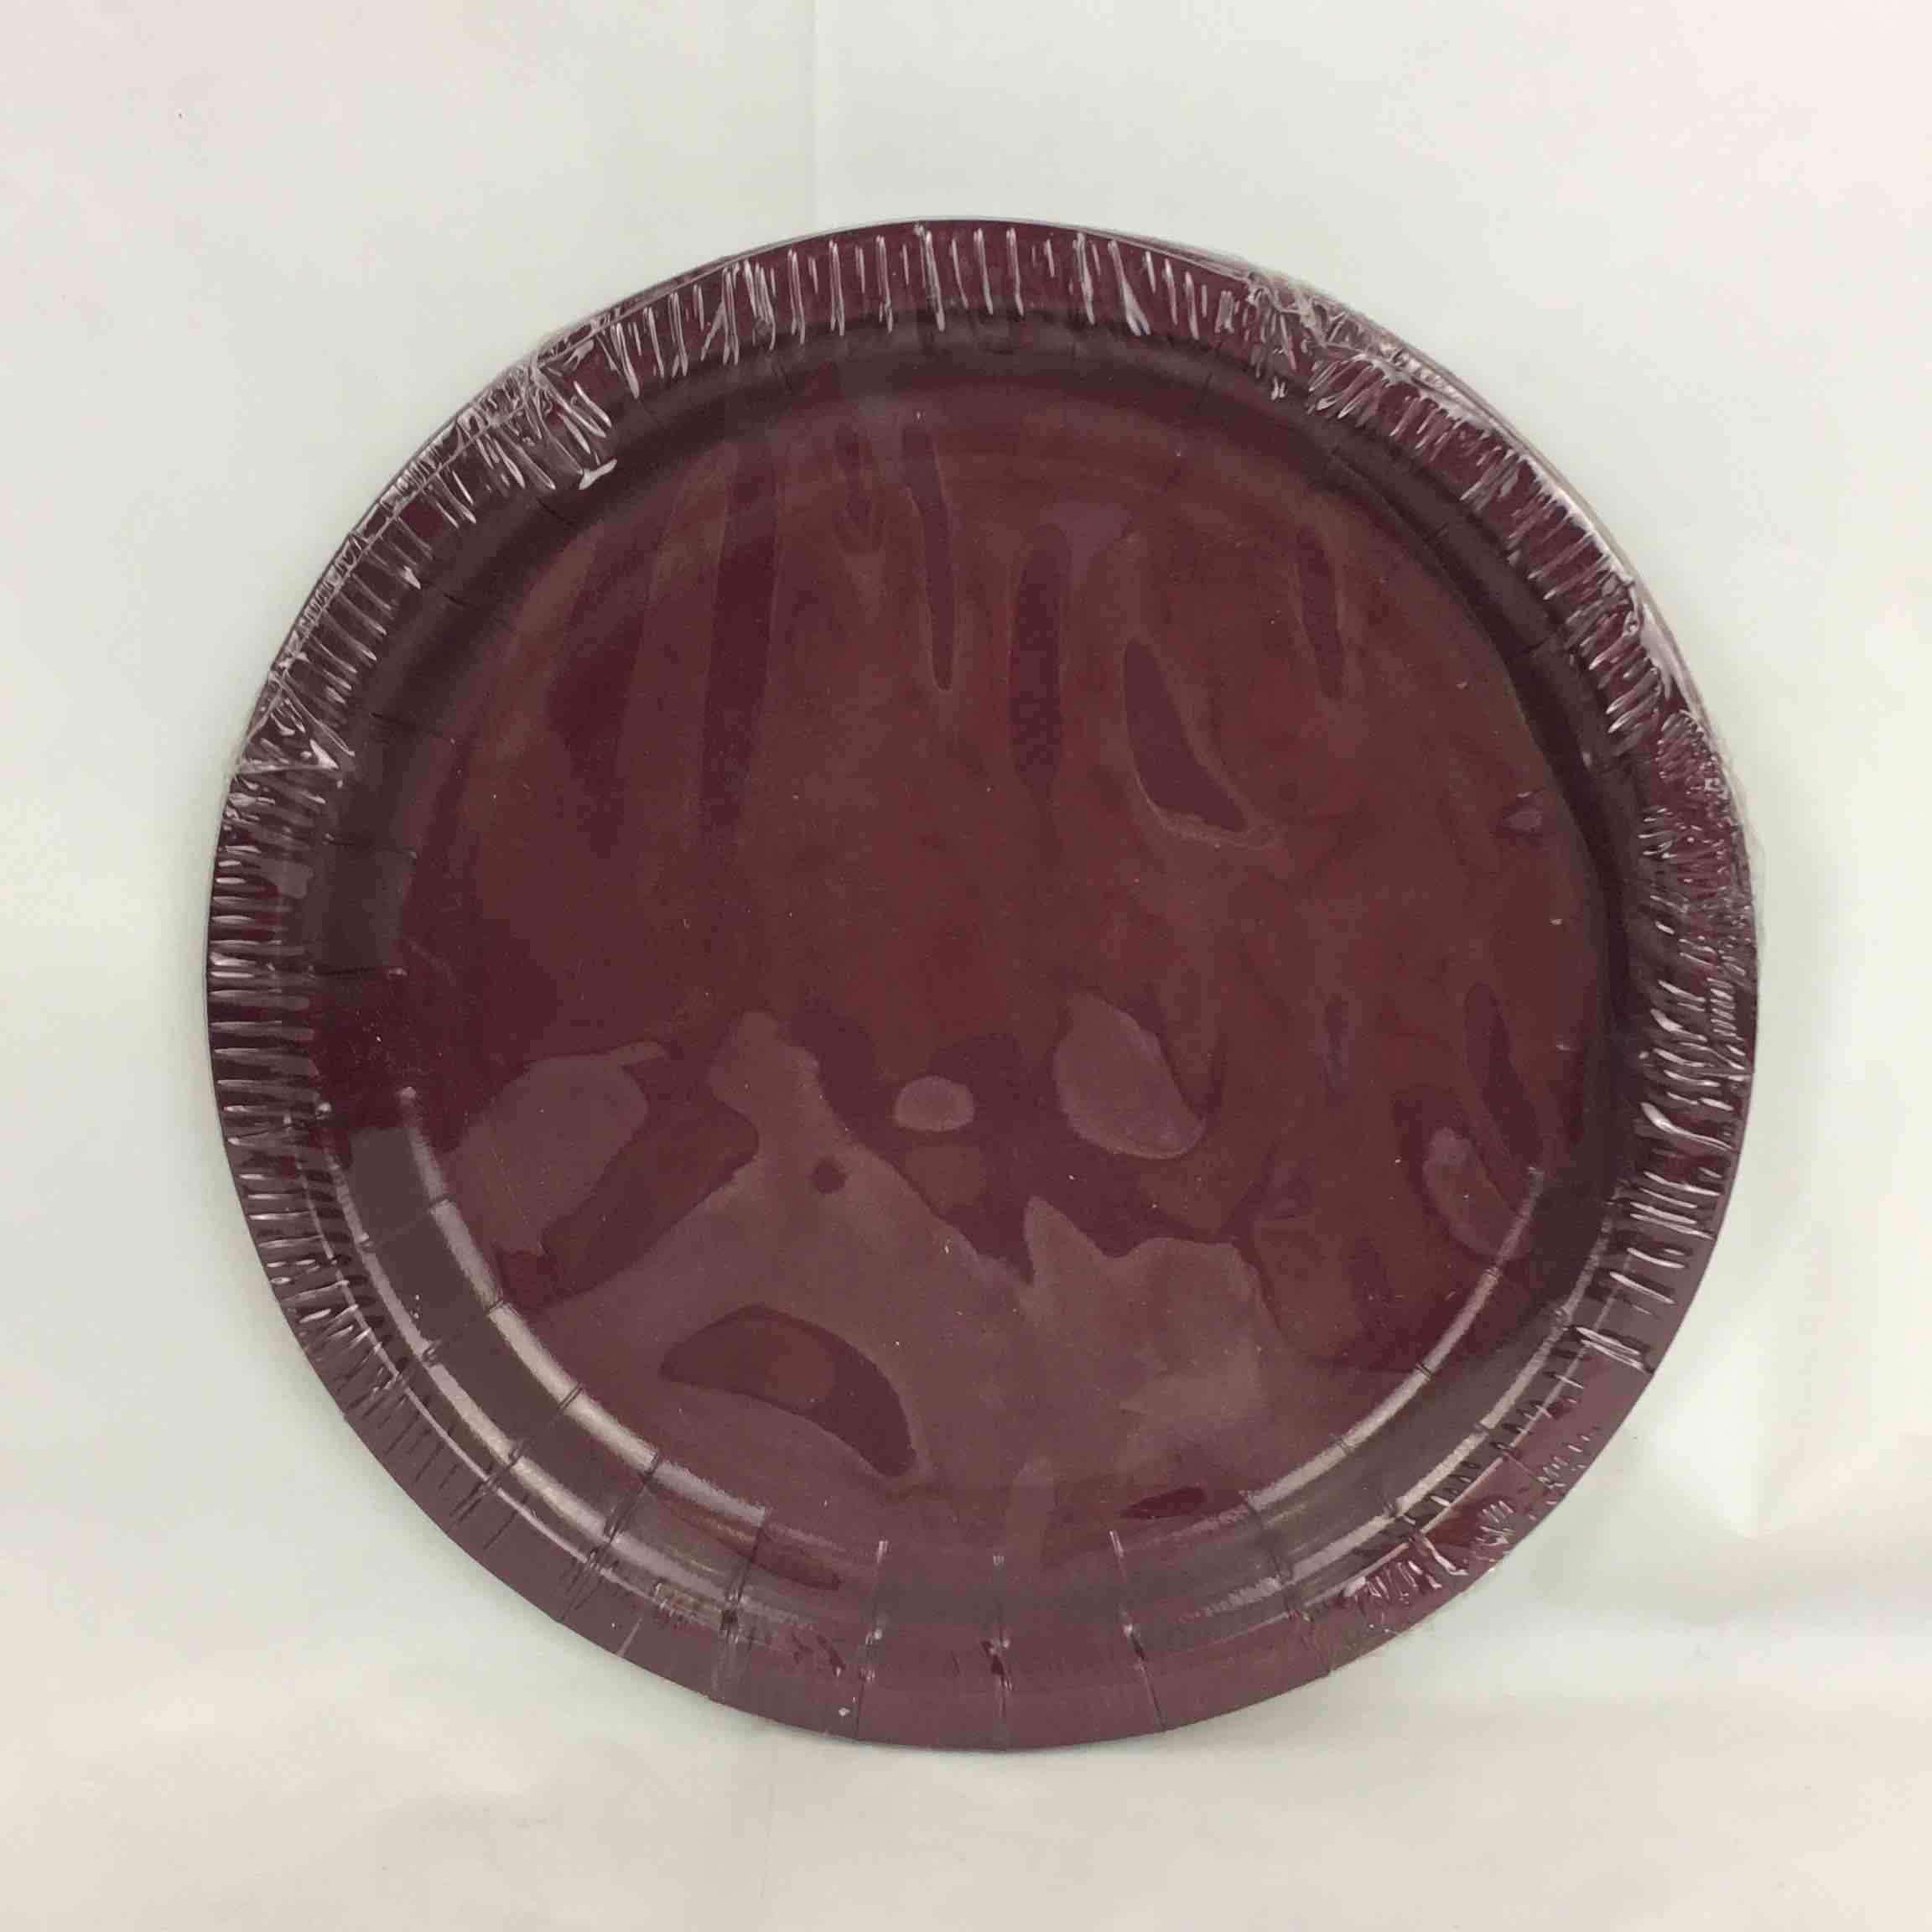 SOLID BURGUNDY PLATES 7in  8pcs